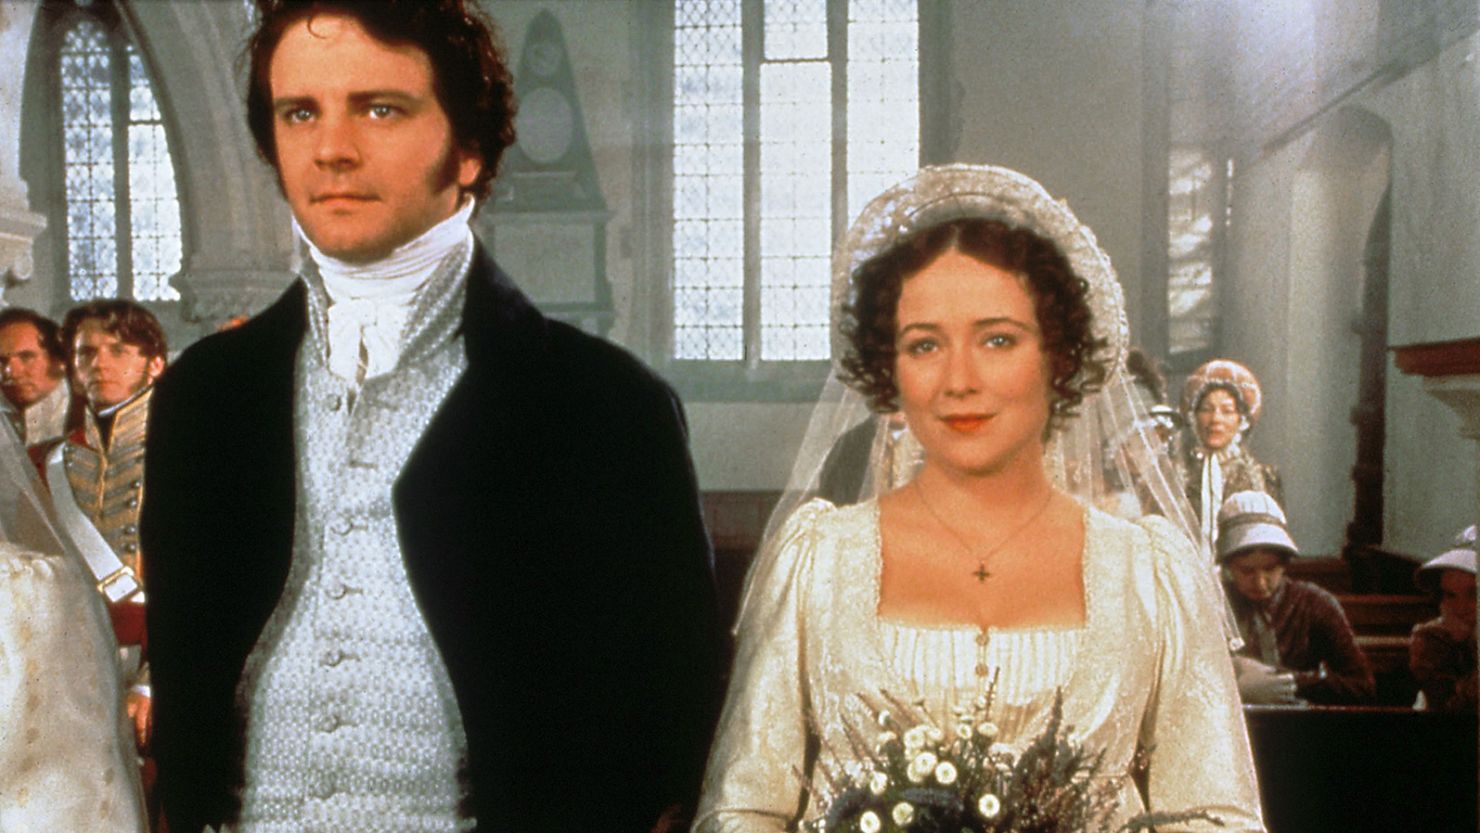 Colin Firth as Mr. Darcy set countless hearts aflame -- and helped kick off a renaissance of Jane Austen adaptations that continues today.